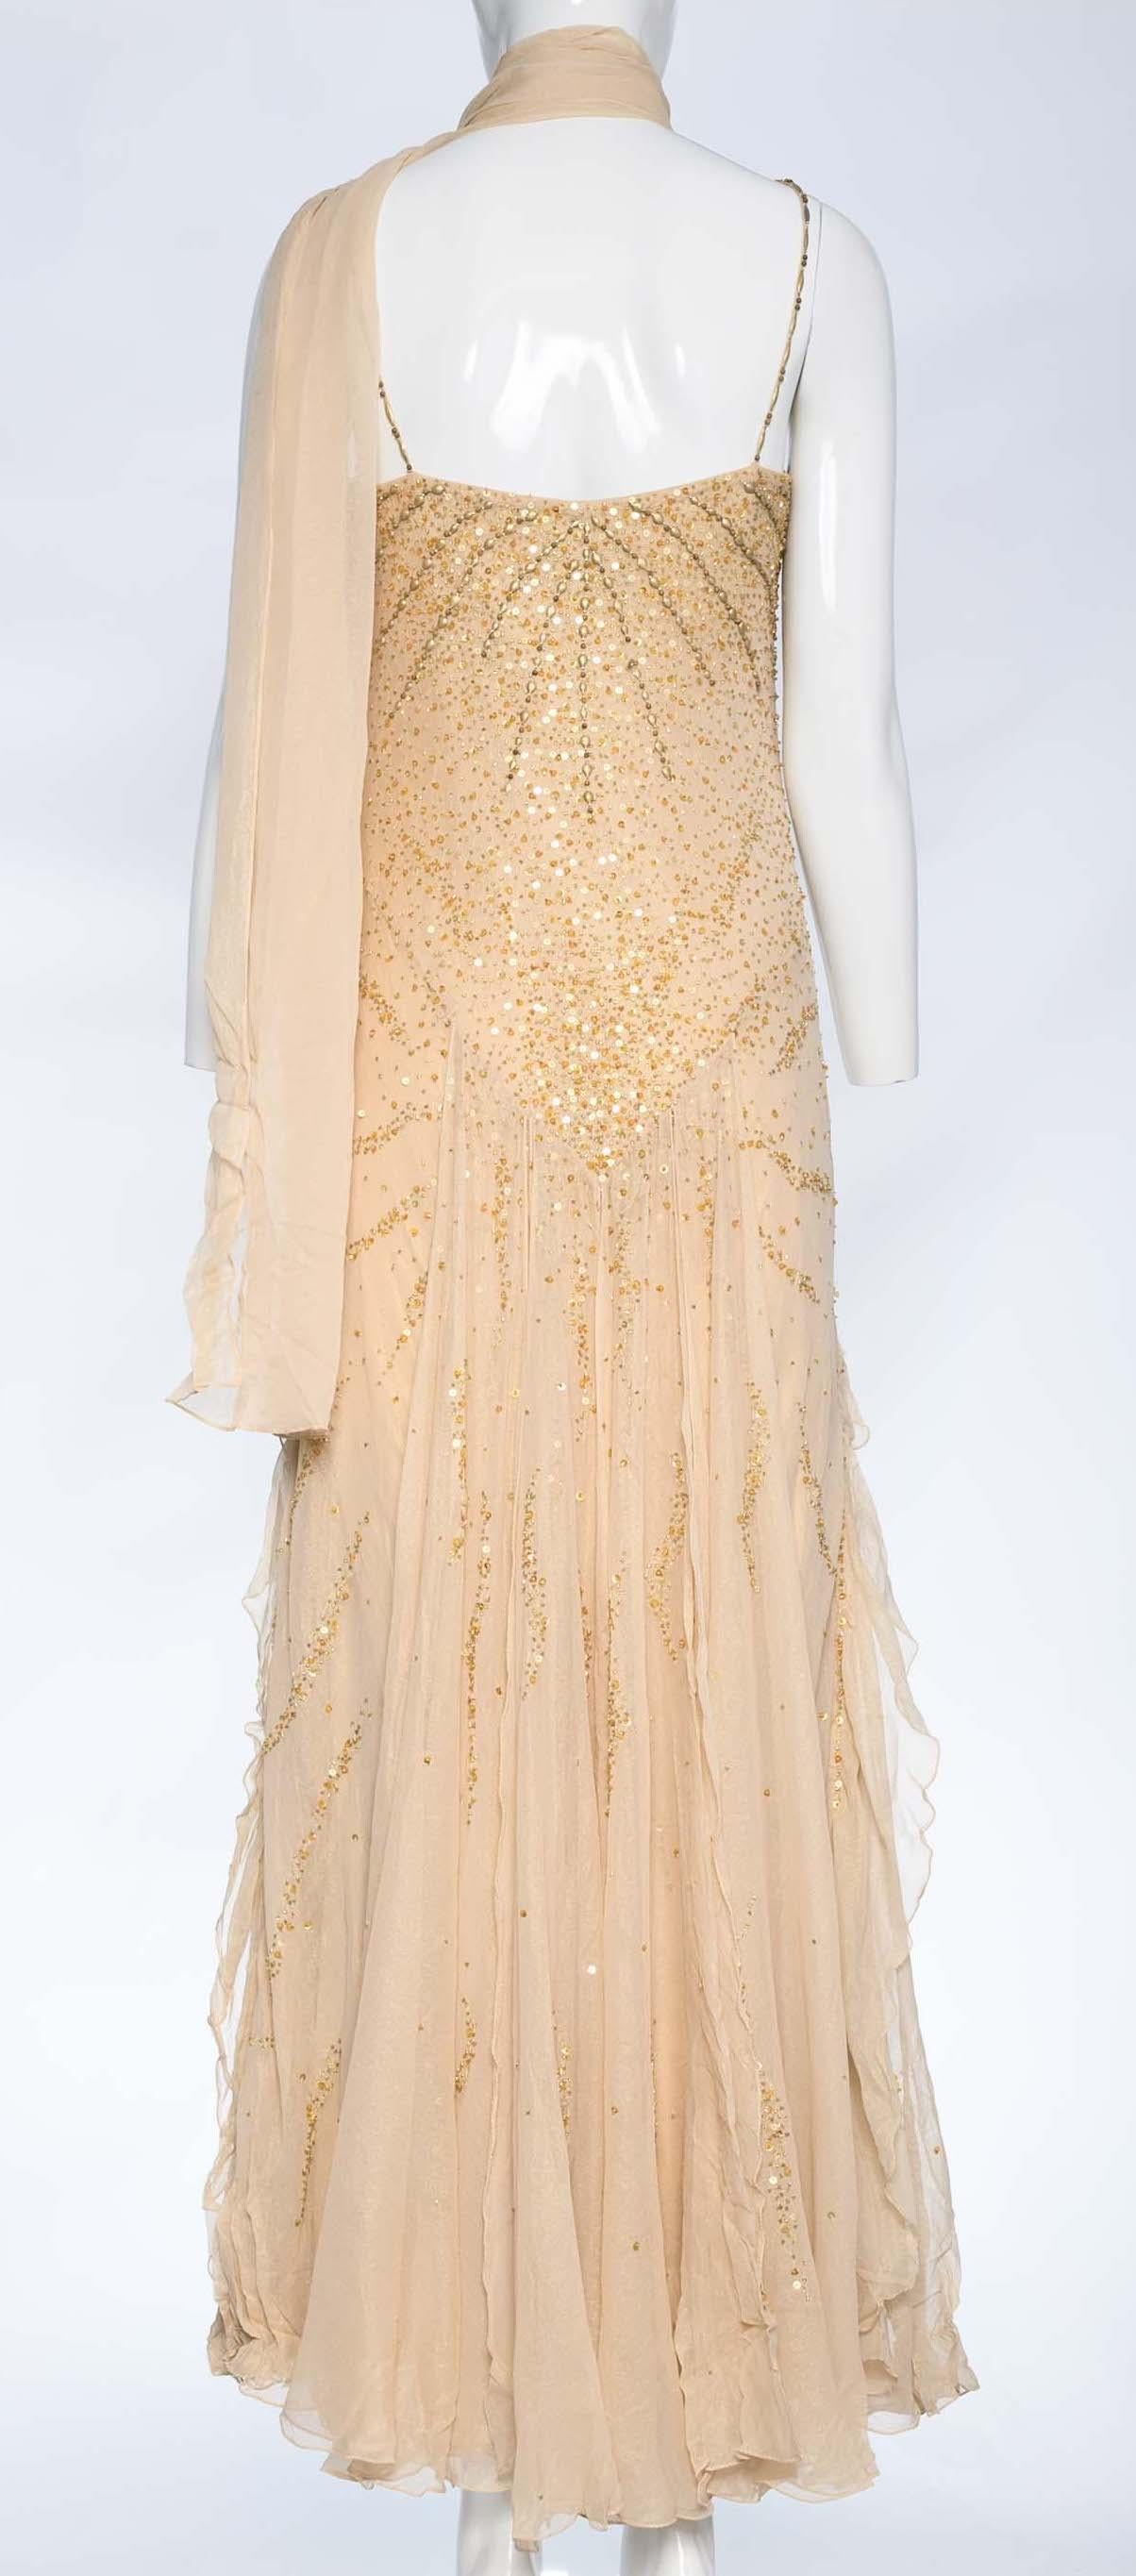 Crafted from light beige silk fabric, this dress emanates elegance and sophistication. The dress is adorned with tonal sequin and hand bead details, showcasing intricate craftsmanship and lending a sparkling allure to the overall design. These